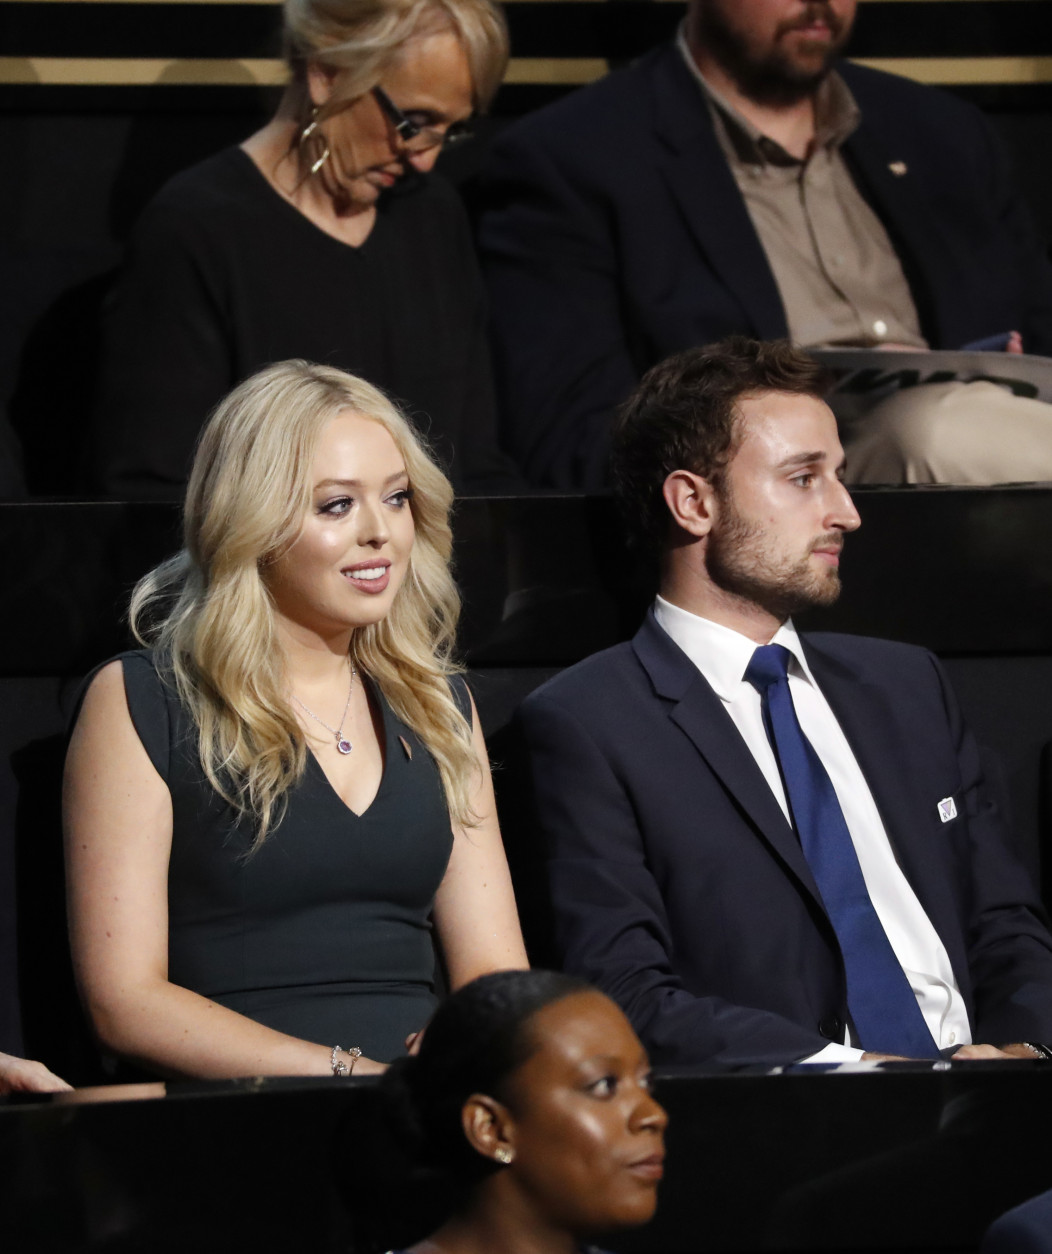 Tiffany Trump, daughter of Donald Trump and Marla Maples. attends the evening session of the opening day of the Republican National Convention in Cleveland, Monday, July 18, 2016. (AP Photo/Paul Sancya)